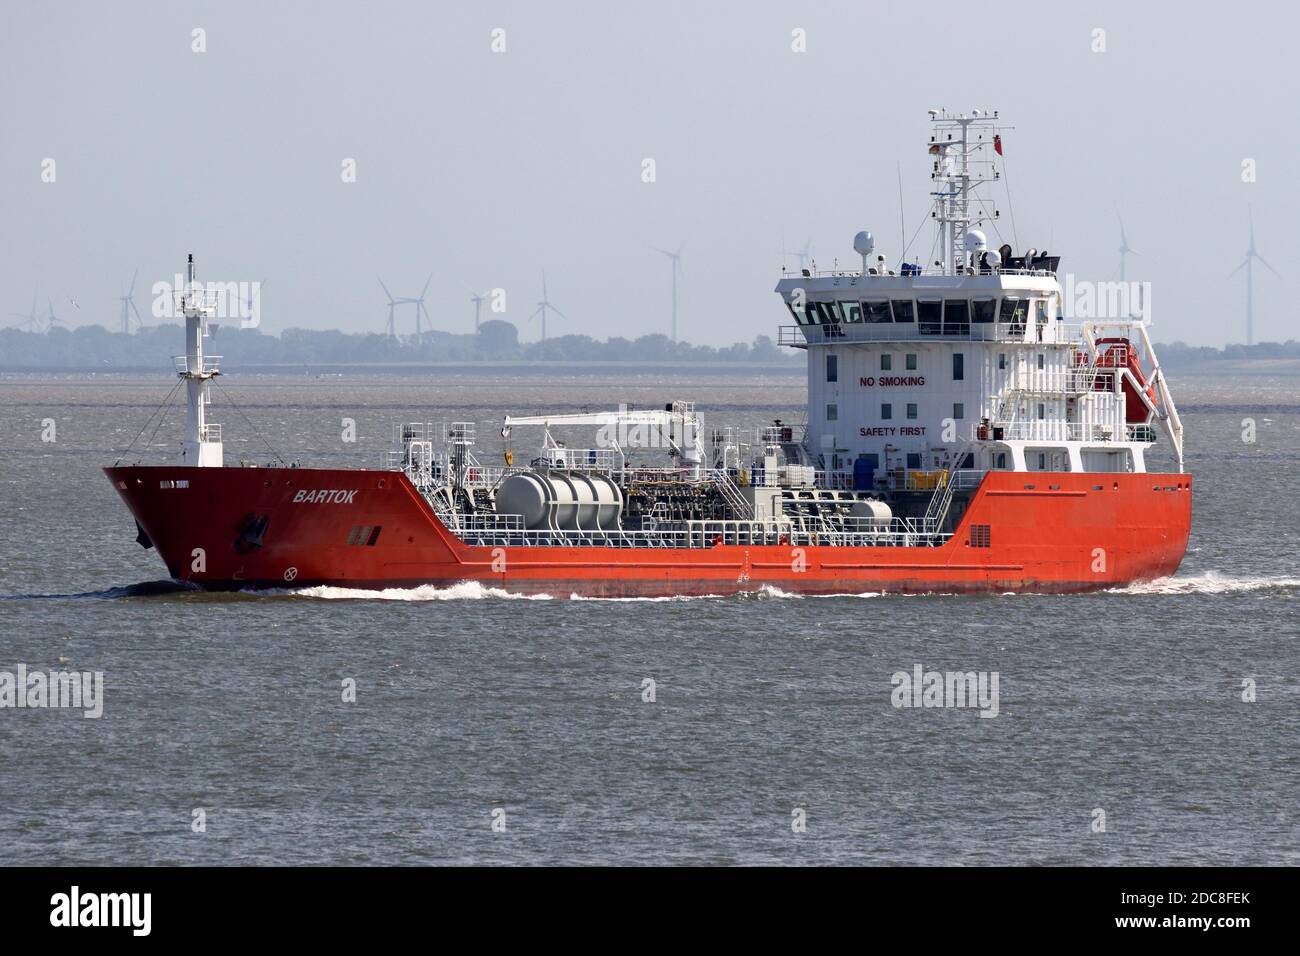 The tanker Bartok will pass Cuxhaven on August 22, 2020 on its way to the North Sea. Stock Photo